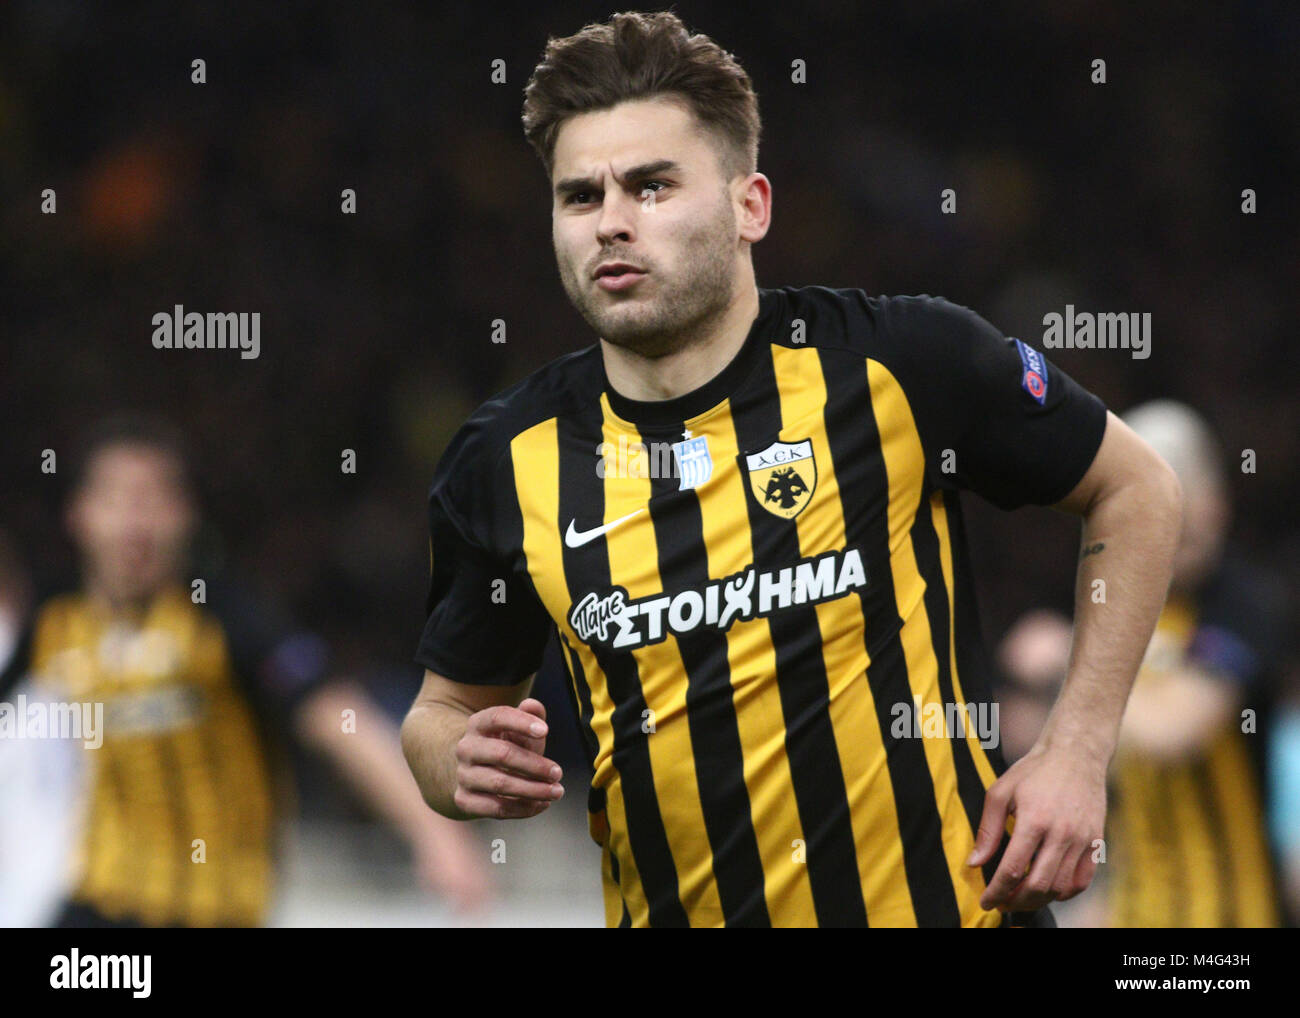 Athens, Greece. 16th Feb, 2018. Astrit Ajdarevic celebrates after scoring a  goal.Europa League Round of